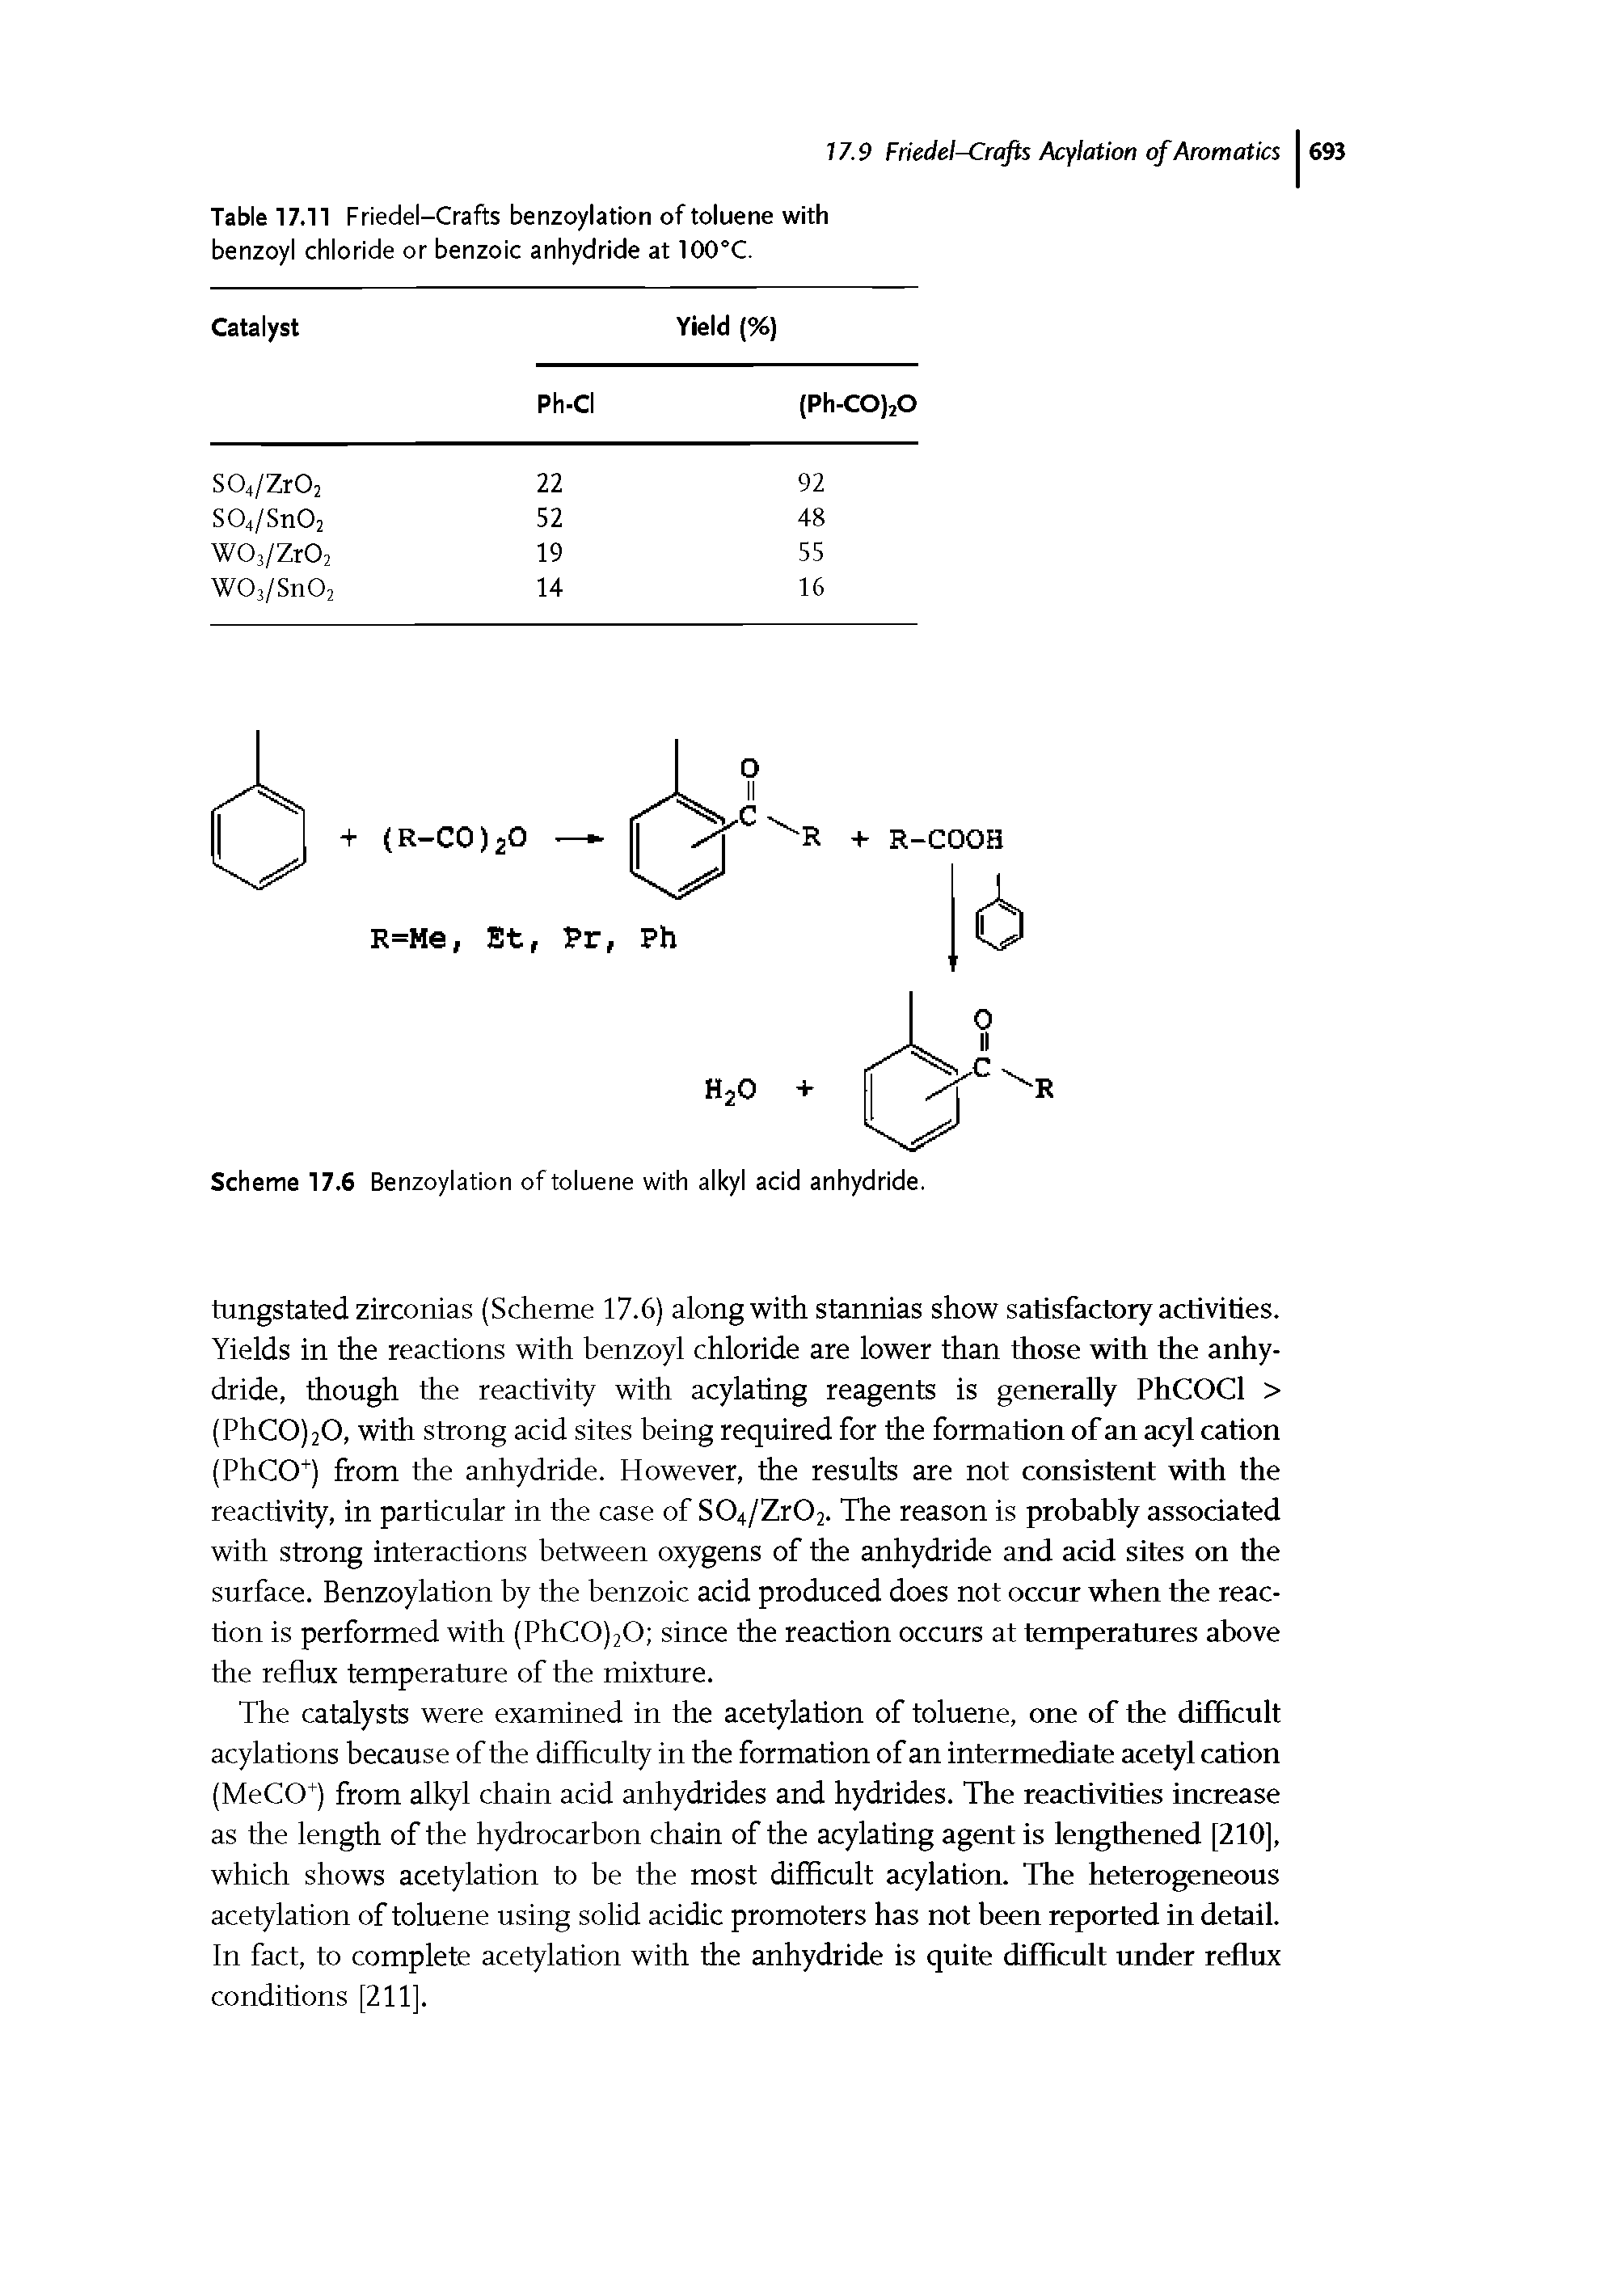 Table 17.11 Friedel-Crafts benzoylation of toluene with benzoyl chloride or benzoic anhydride at 100°C.